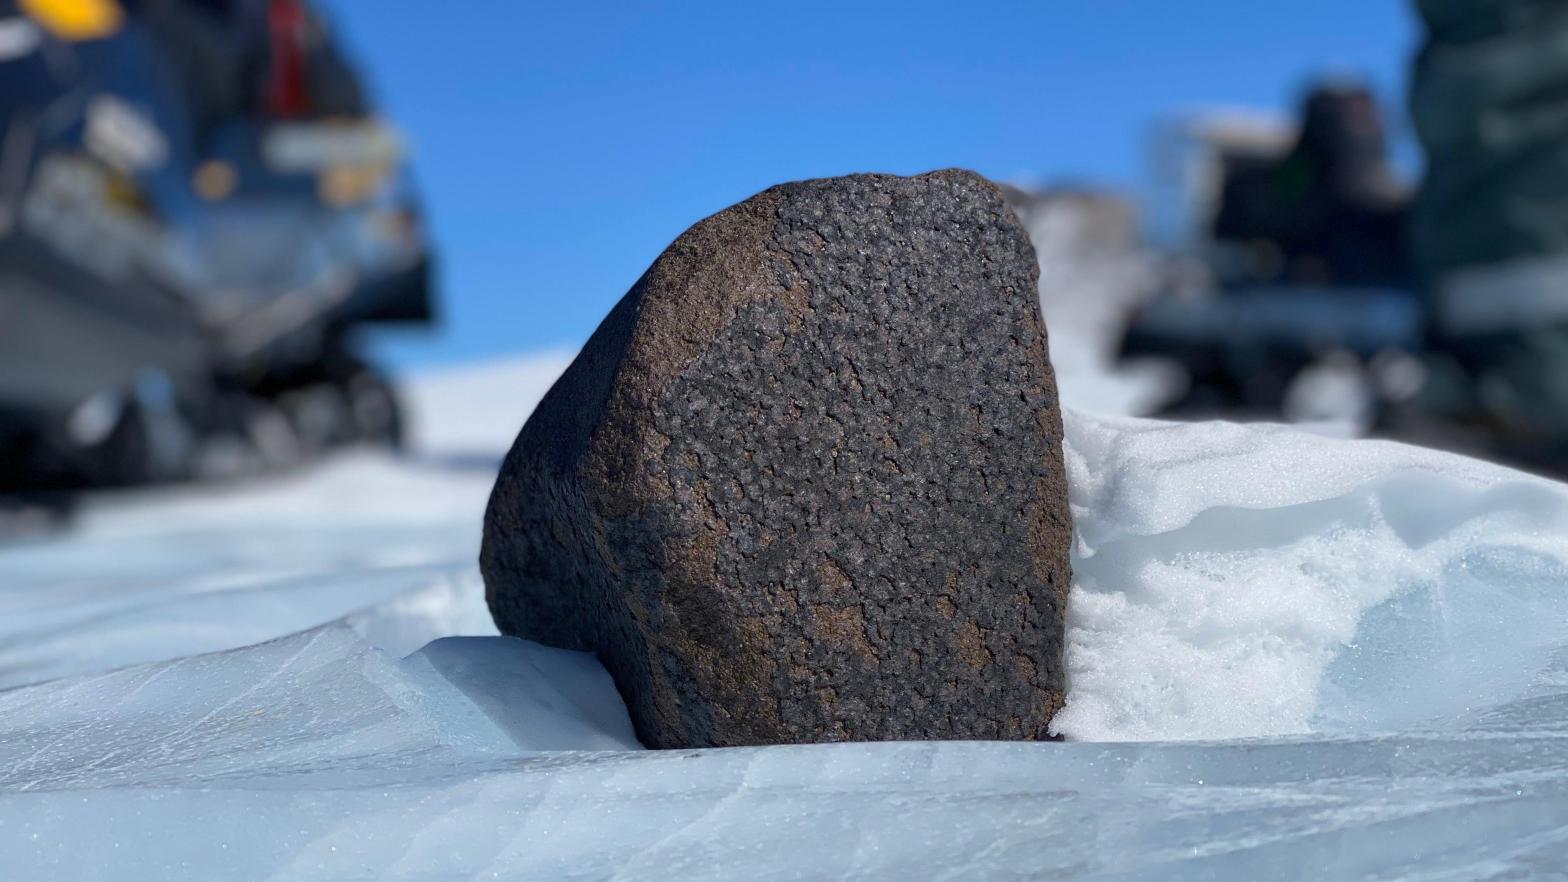 The 8 kg (7.6 kilogram) meteorite was found sitting on the surface of the Antarctic desert, where its black composition contrasted against the snow.  (Image: Maria Valdes)